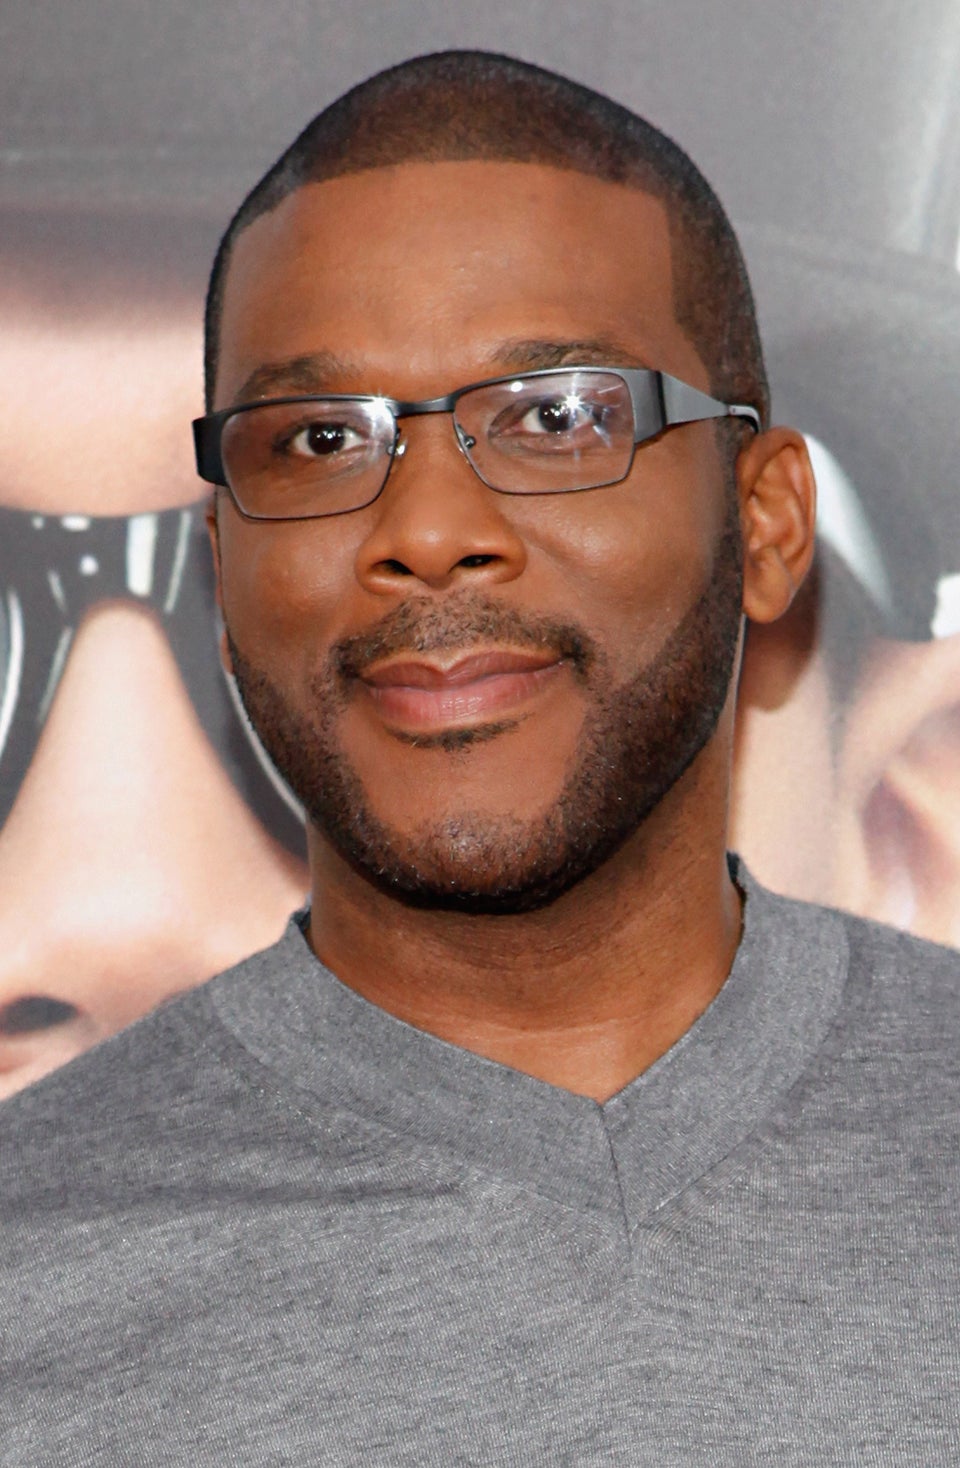 Tyler Perry Is Making a Madea Halloween Movie Based on a Joke in Chris Rock’s ‘Top Five’